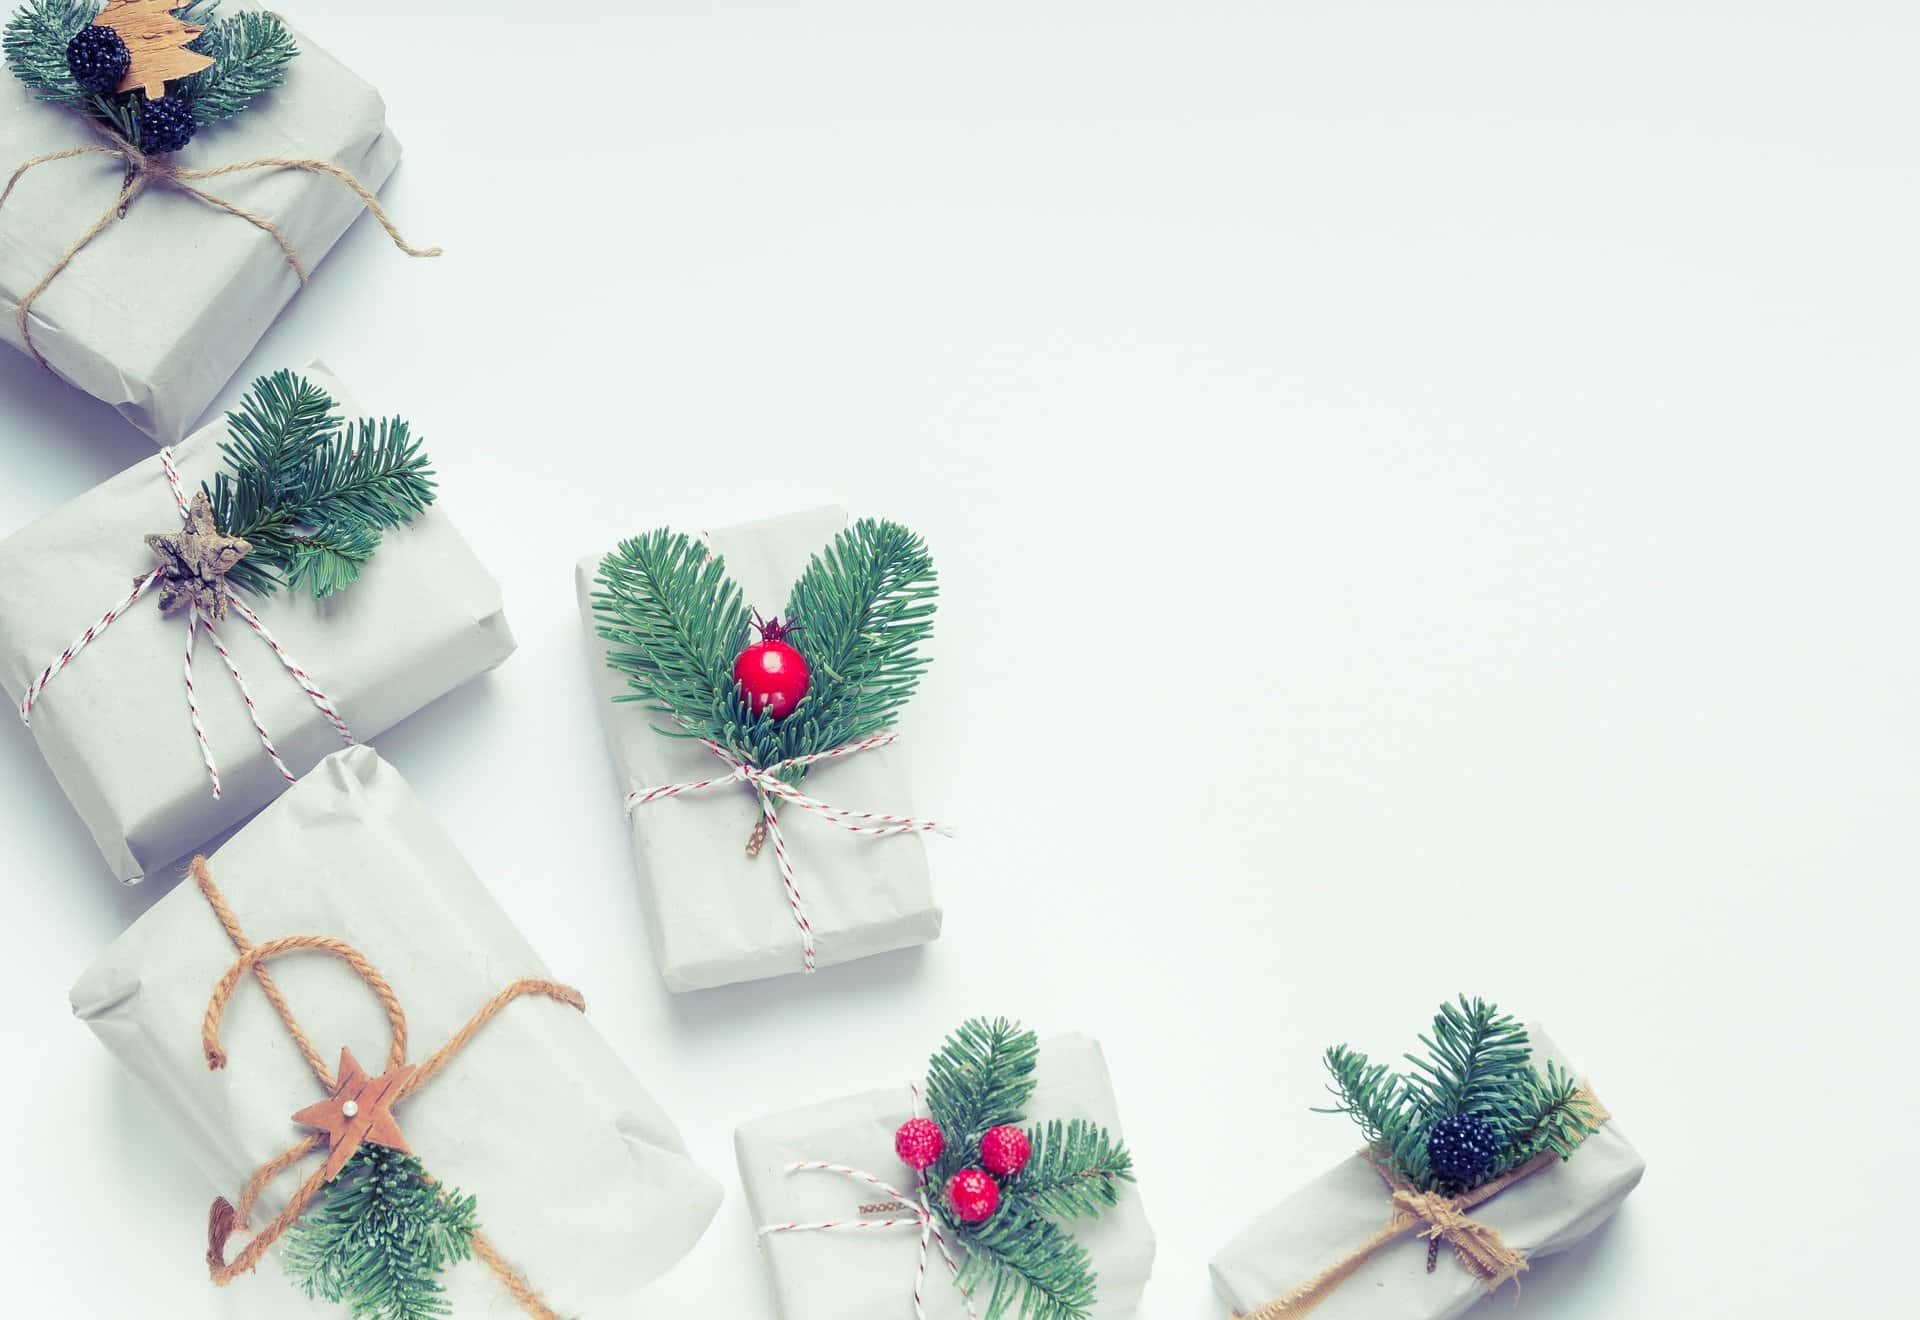 Passive-Aggressive Christmas Gift Stories facts